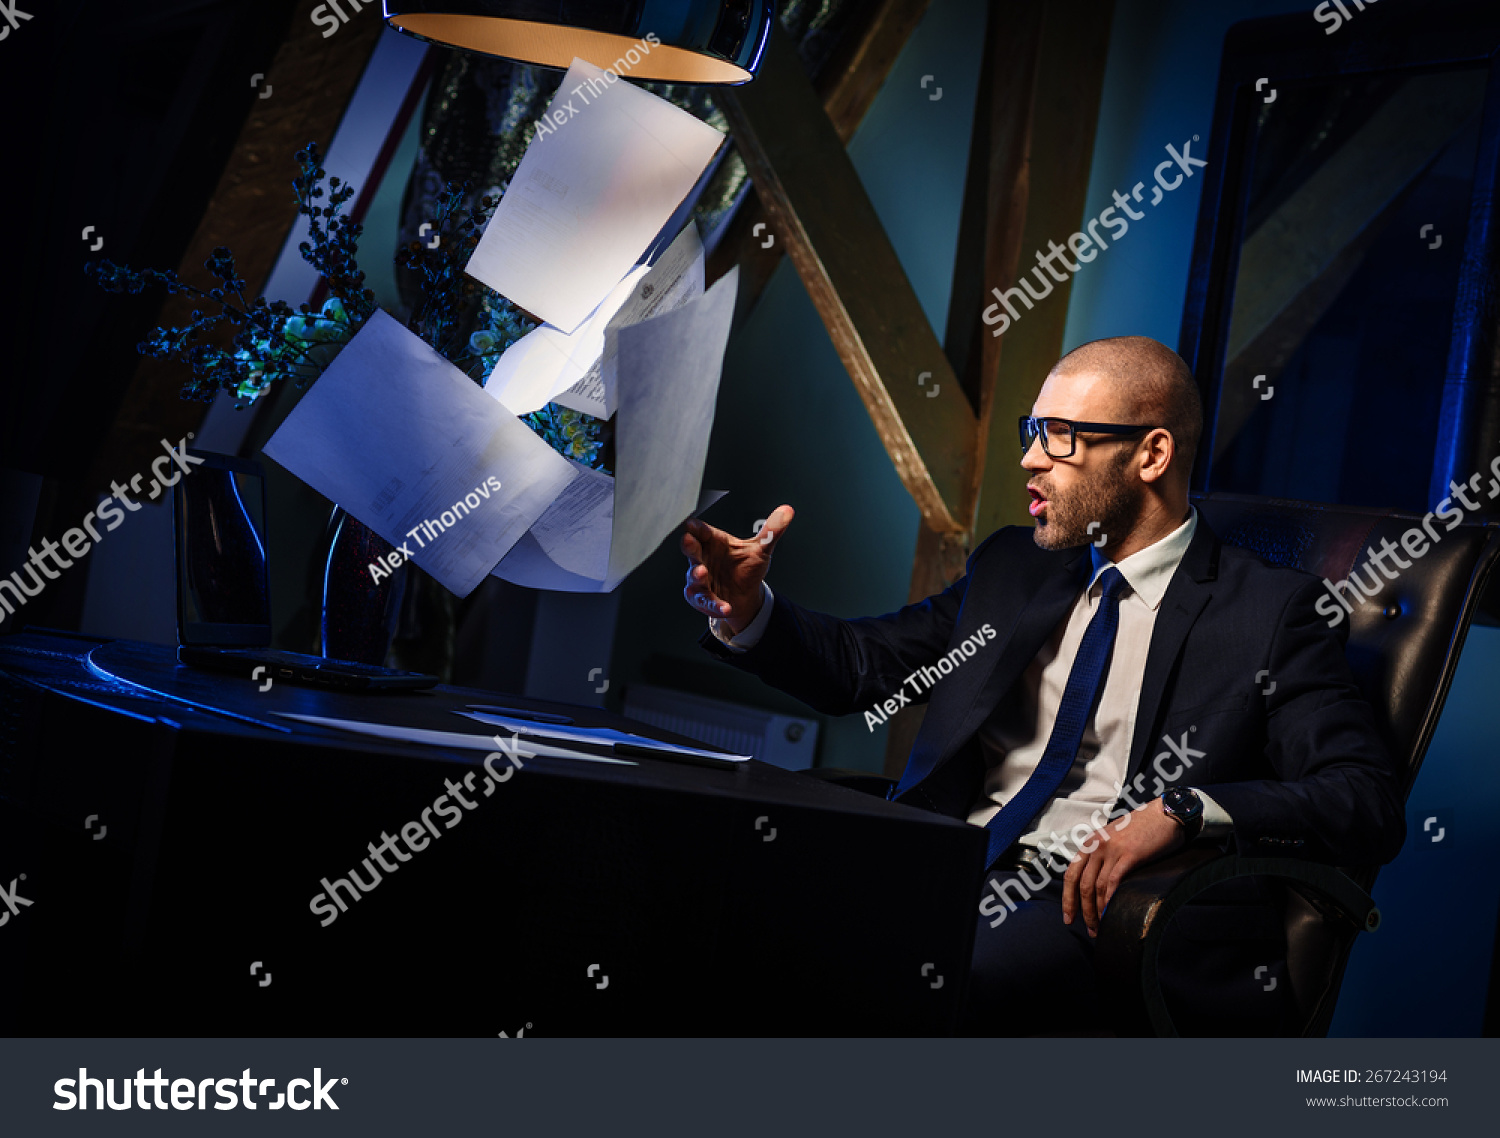 Handsome Man Suit Throwing Documents Stock Photo 267243194 | Shutterstock